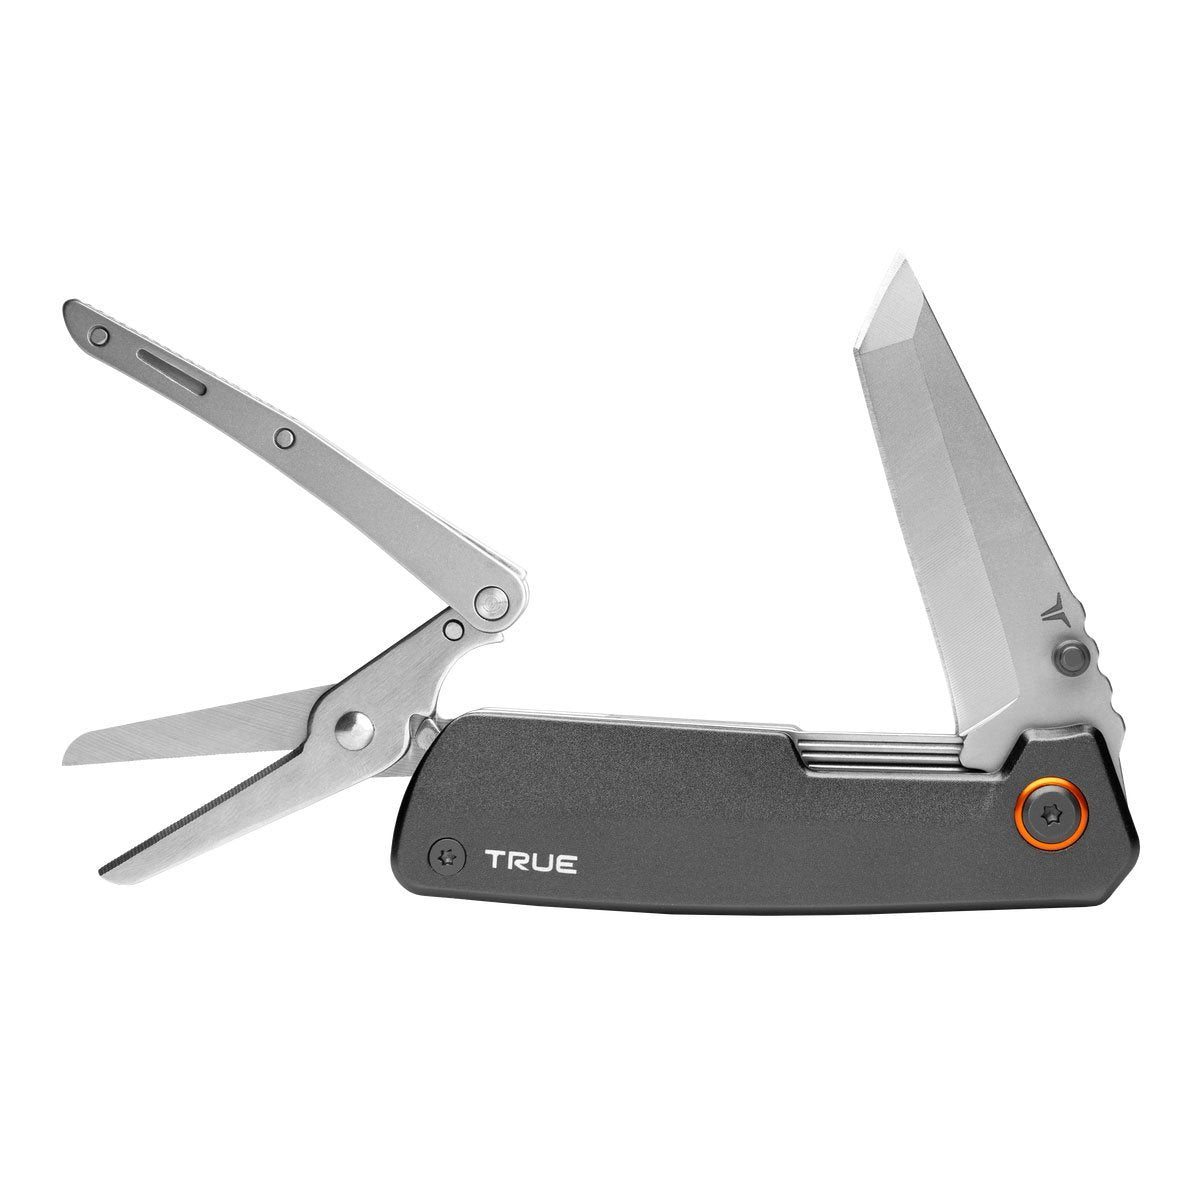 Have You Seen This? True Knives Mycro Knife Sharpener